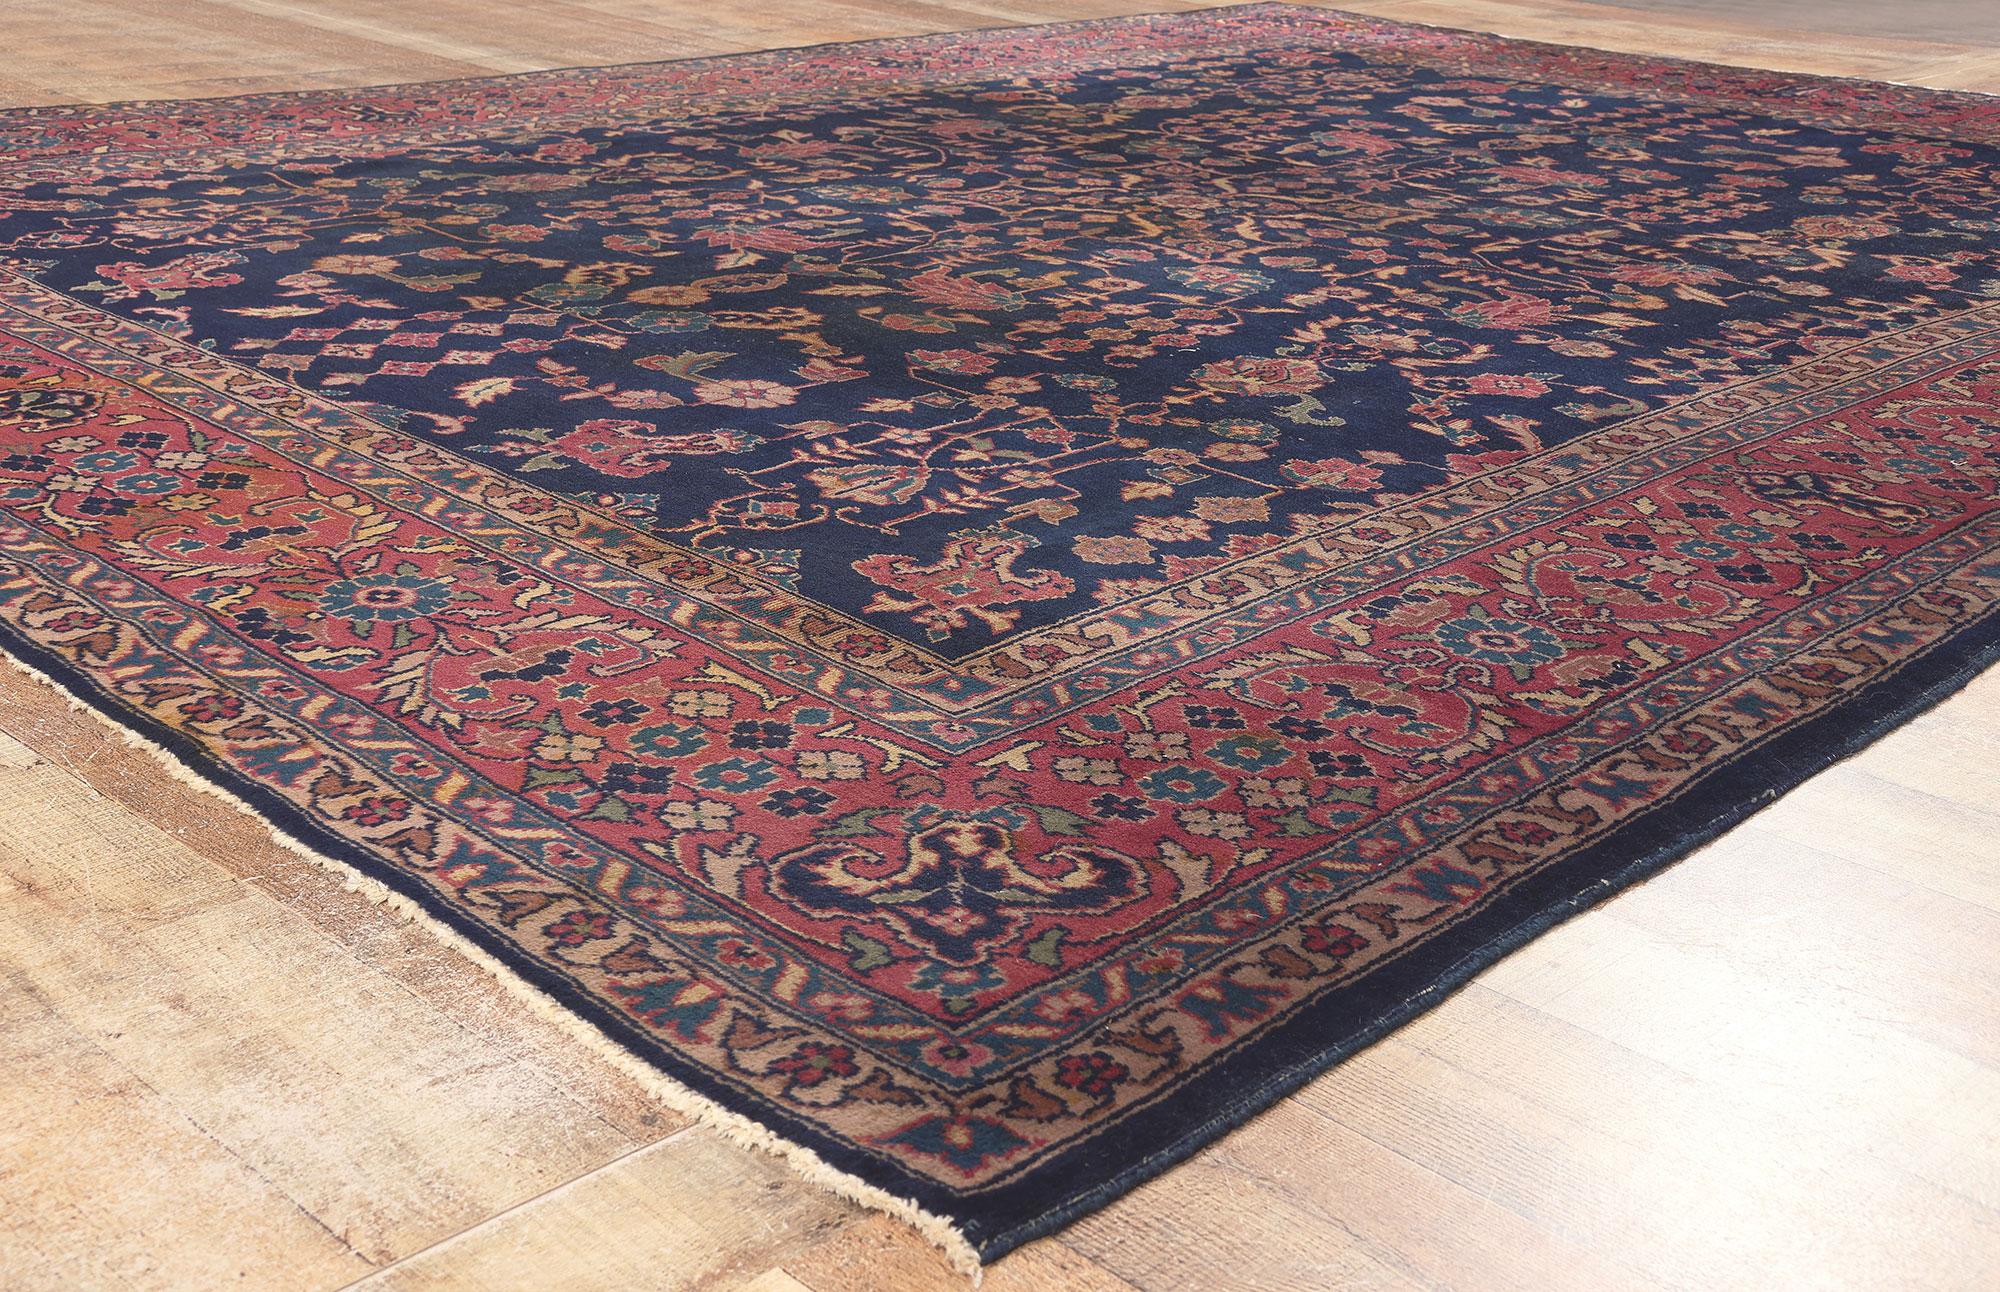 Wool Antique Turkish Sparta Rug, Sophisticated Chic Meets Traditional Sensibility